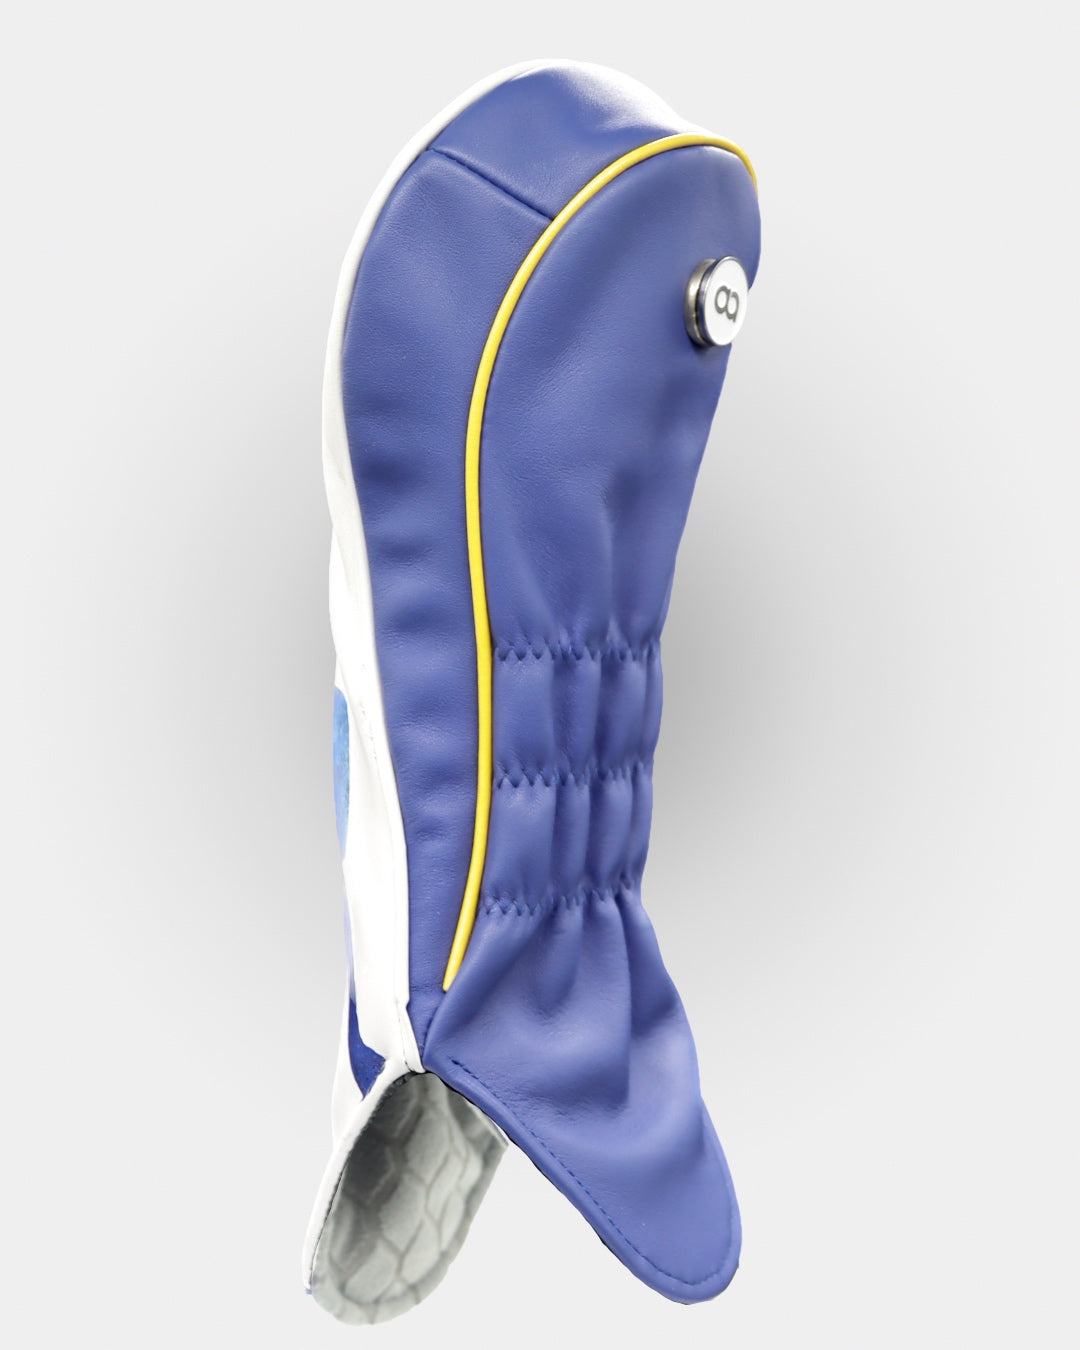 Europe white and blue leather driver headcover by David Alexander